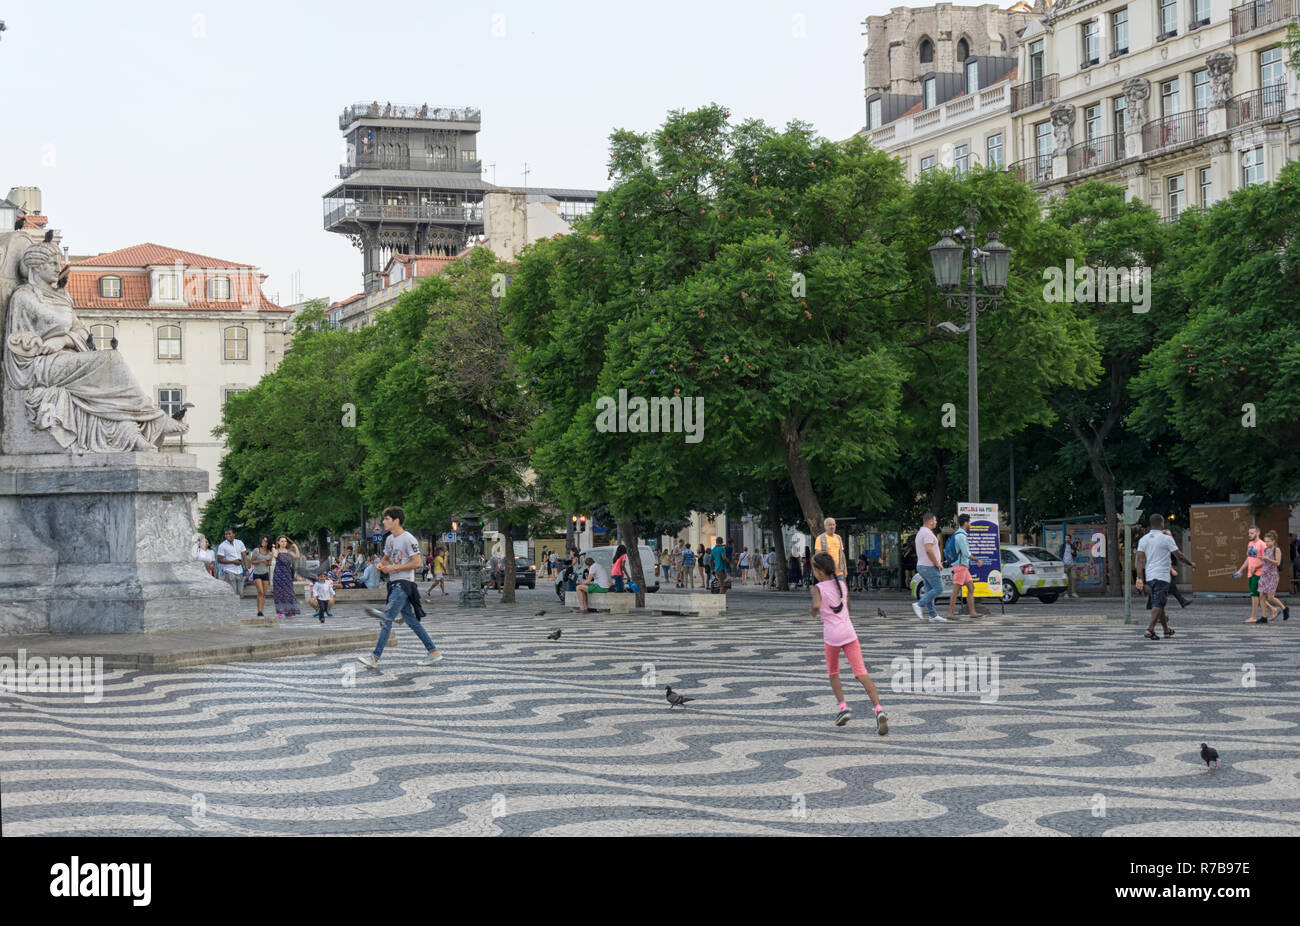 LISBON, PORTUGAL - August 30, 2018: Rossio Square. The terrace and walkway of the Santa Justa Lift, with the upper level kiosk and Convent of Our Lady Stock Photo